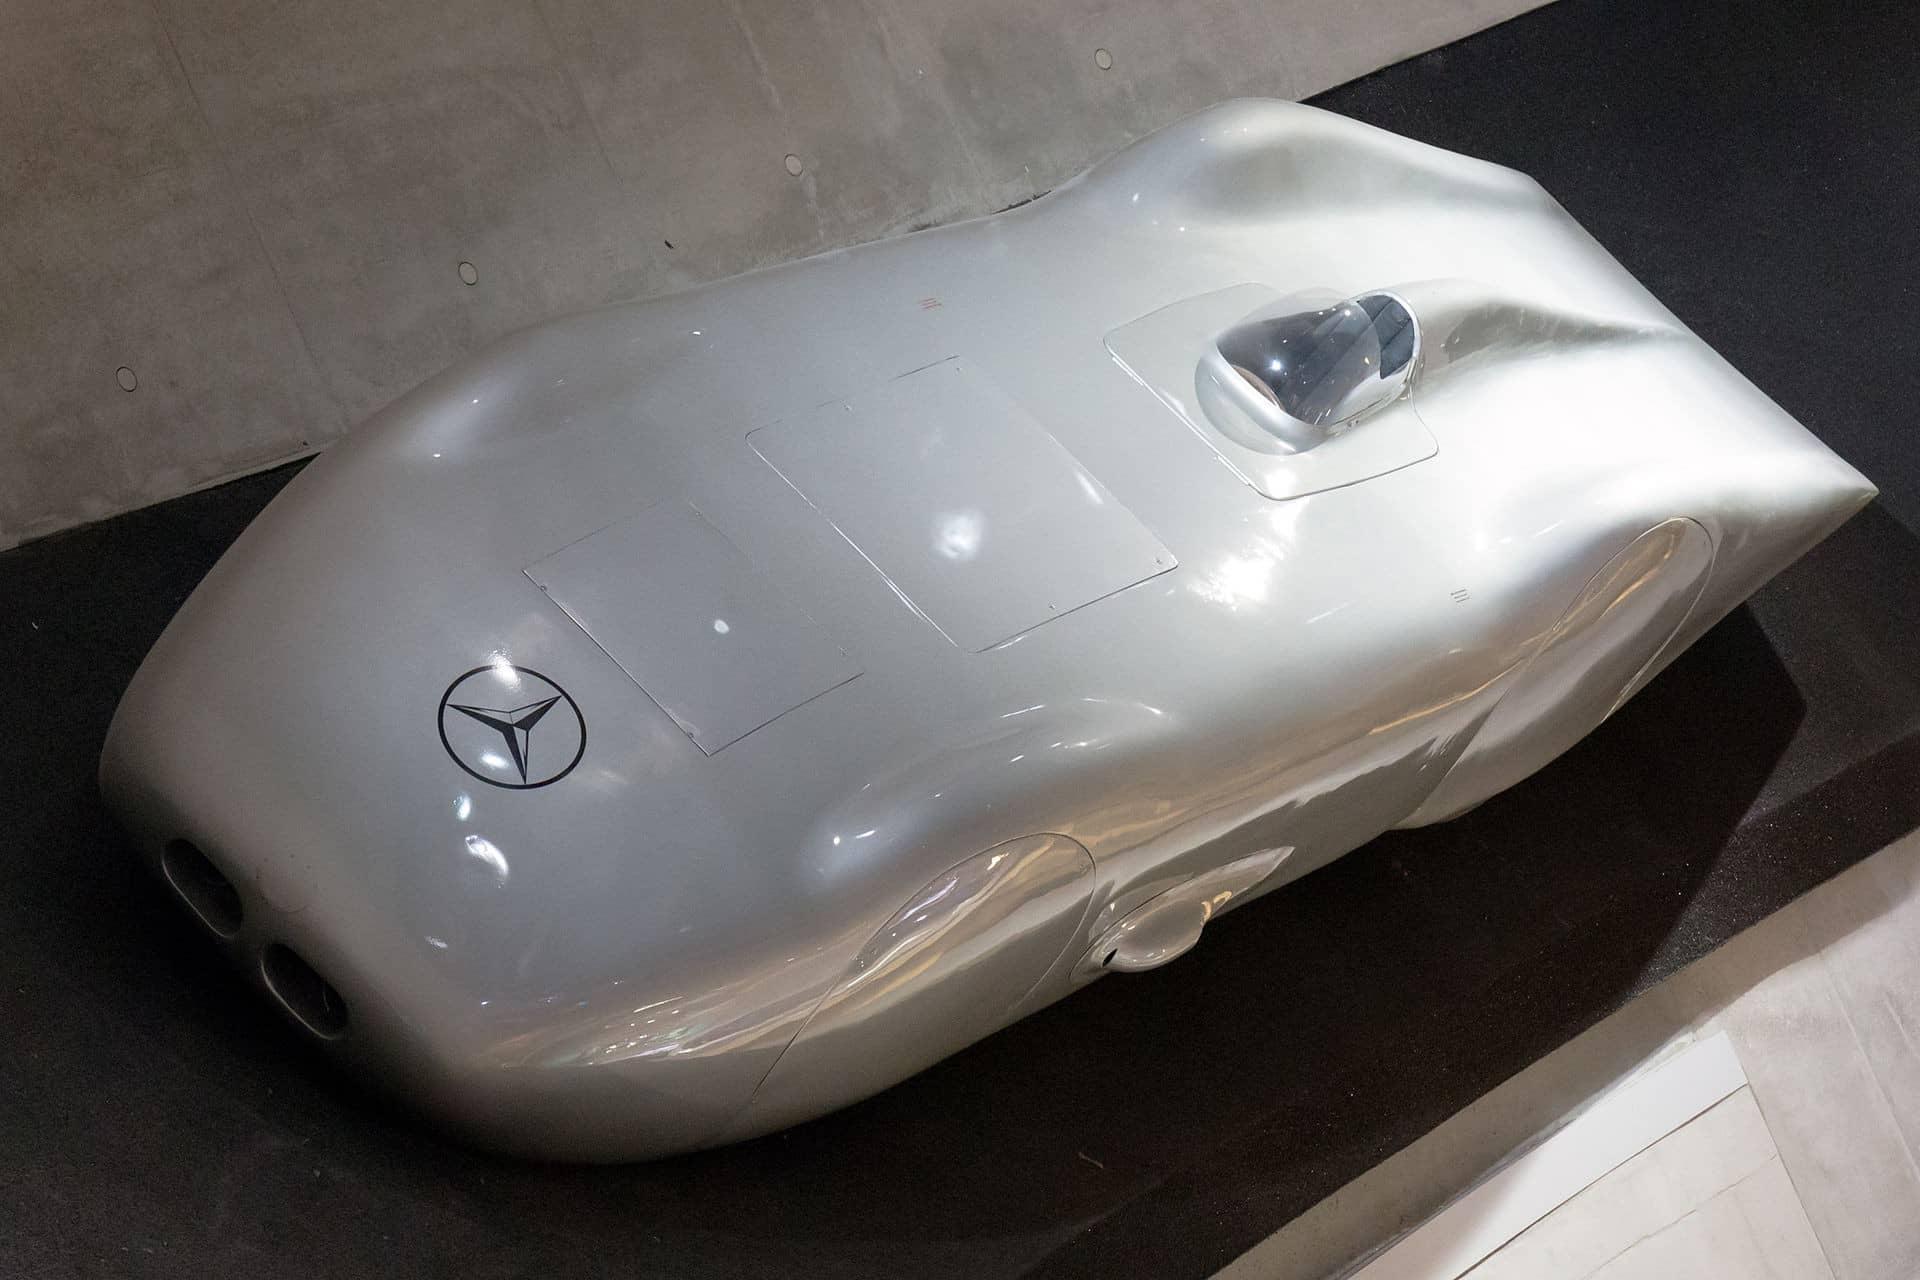 The record breaking Mercedes W125 - Drag coefficient Cd of 0.235 (Image credit: mercedes-benz.com)